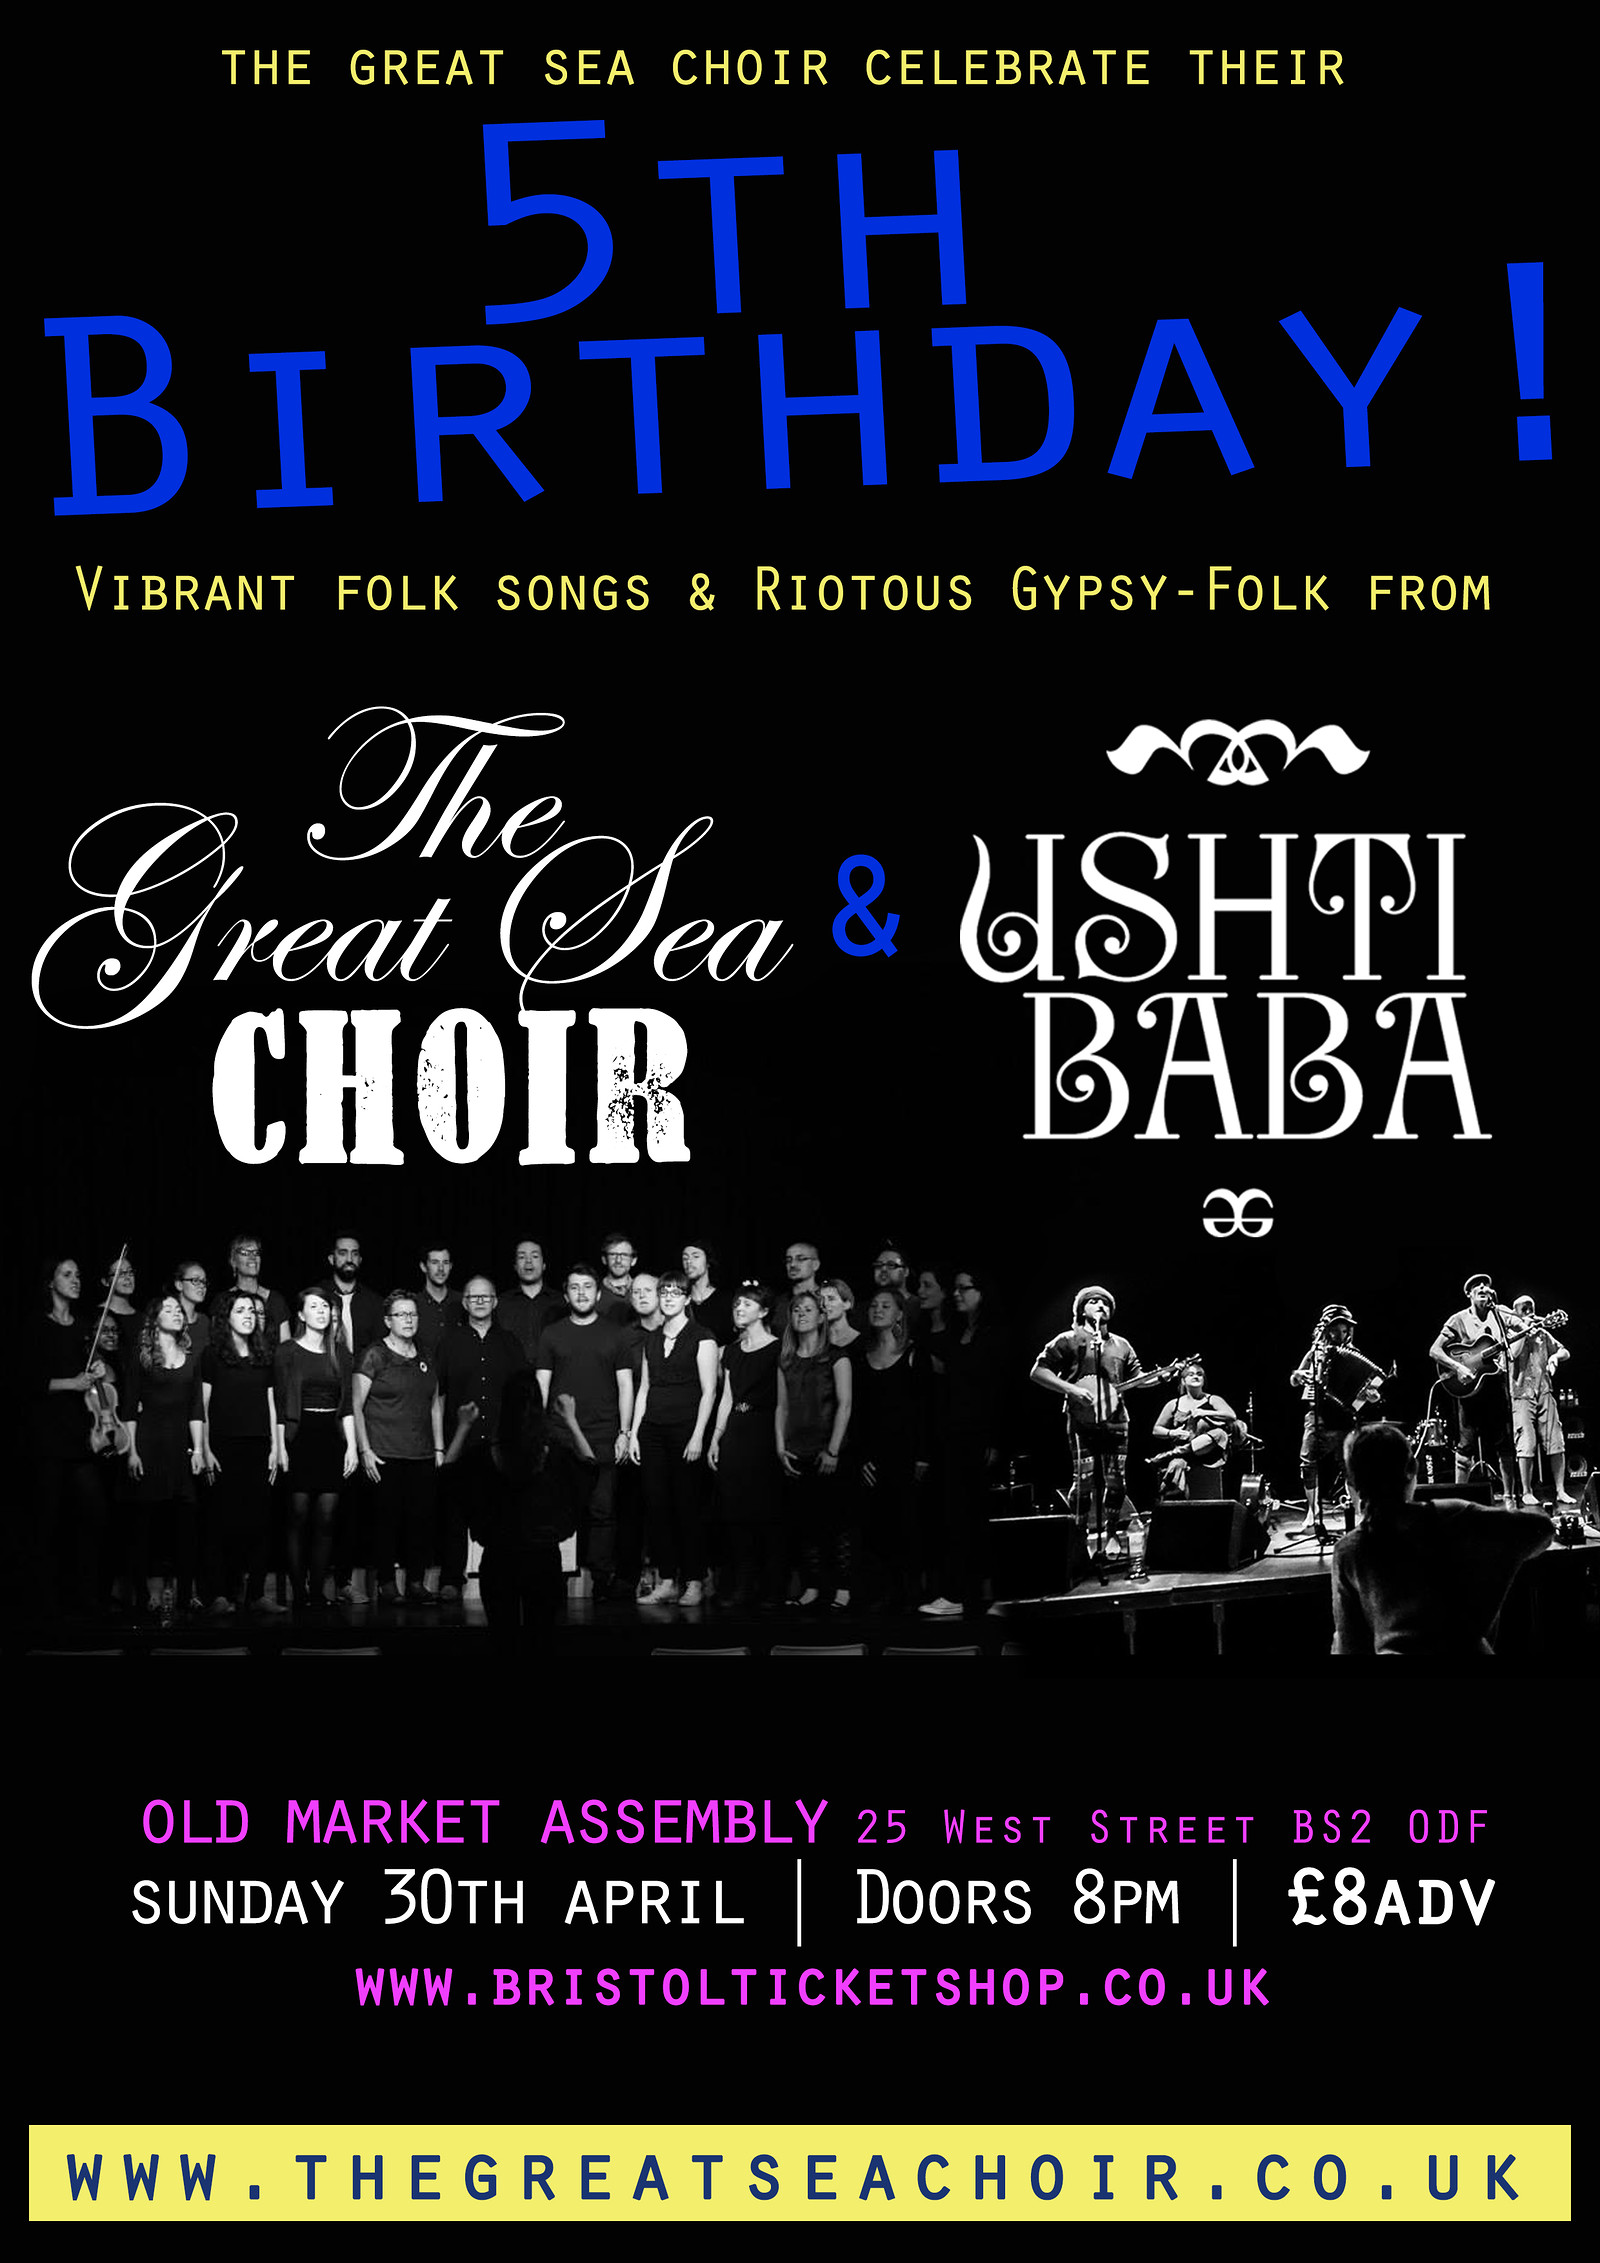 The Great Sea Choir's 5th Birthday with Ushti Baba at The Old Market Assembly